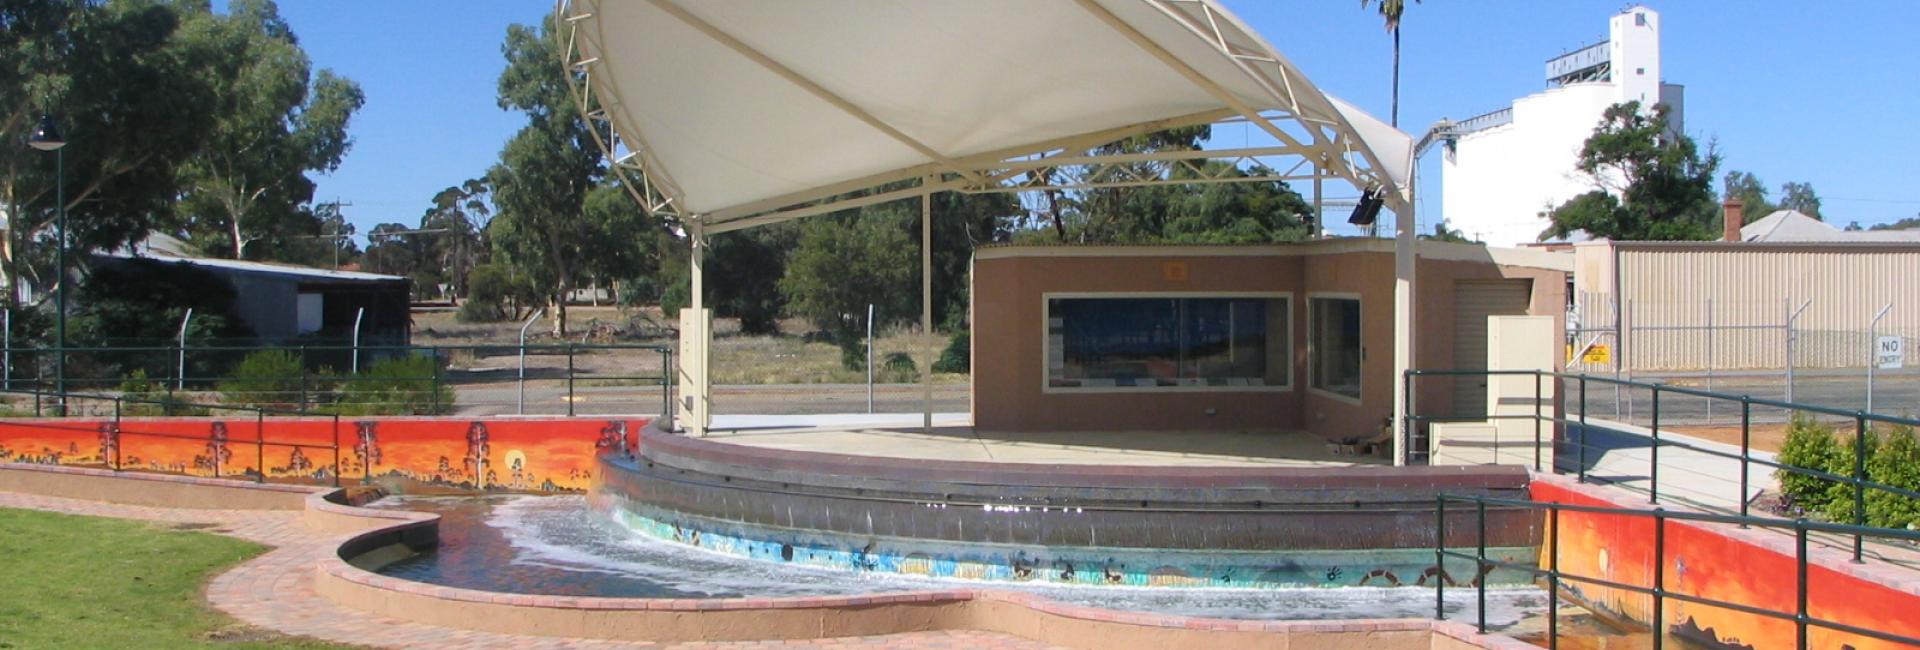 Tammin Hydrology Model and Amphitheatre